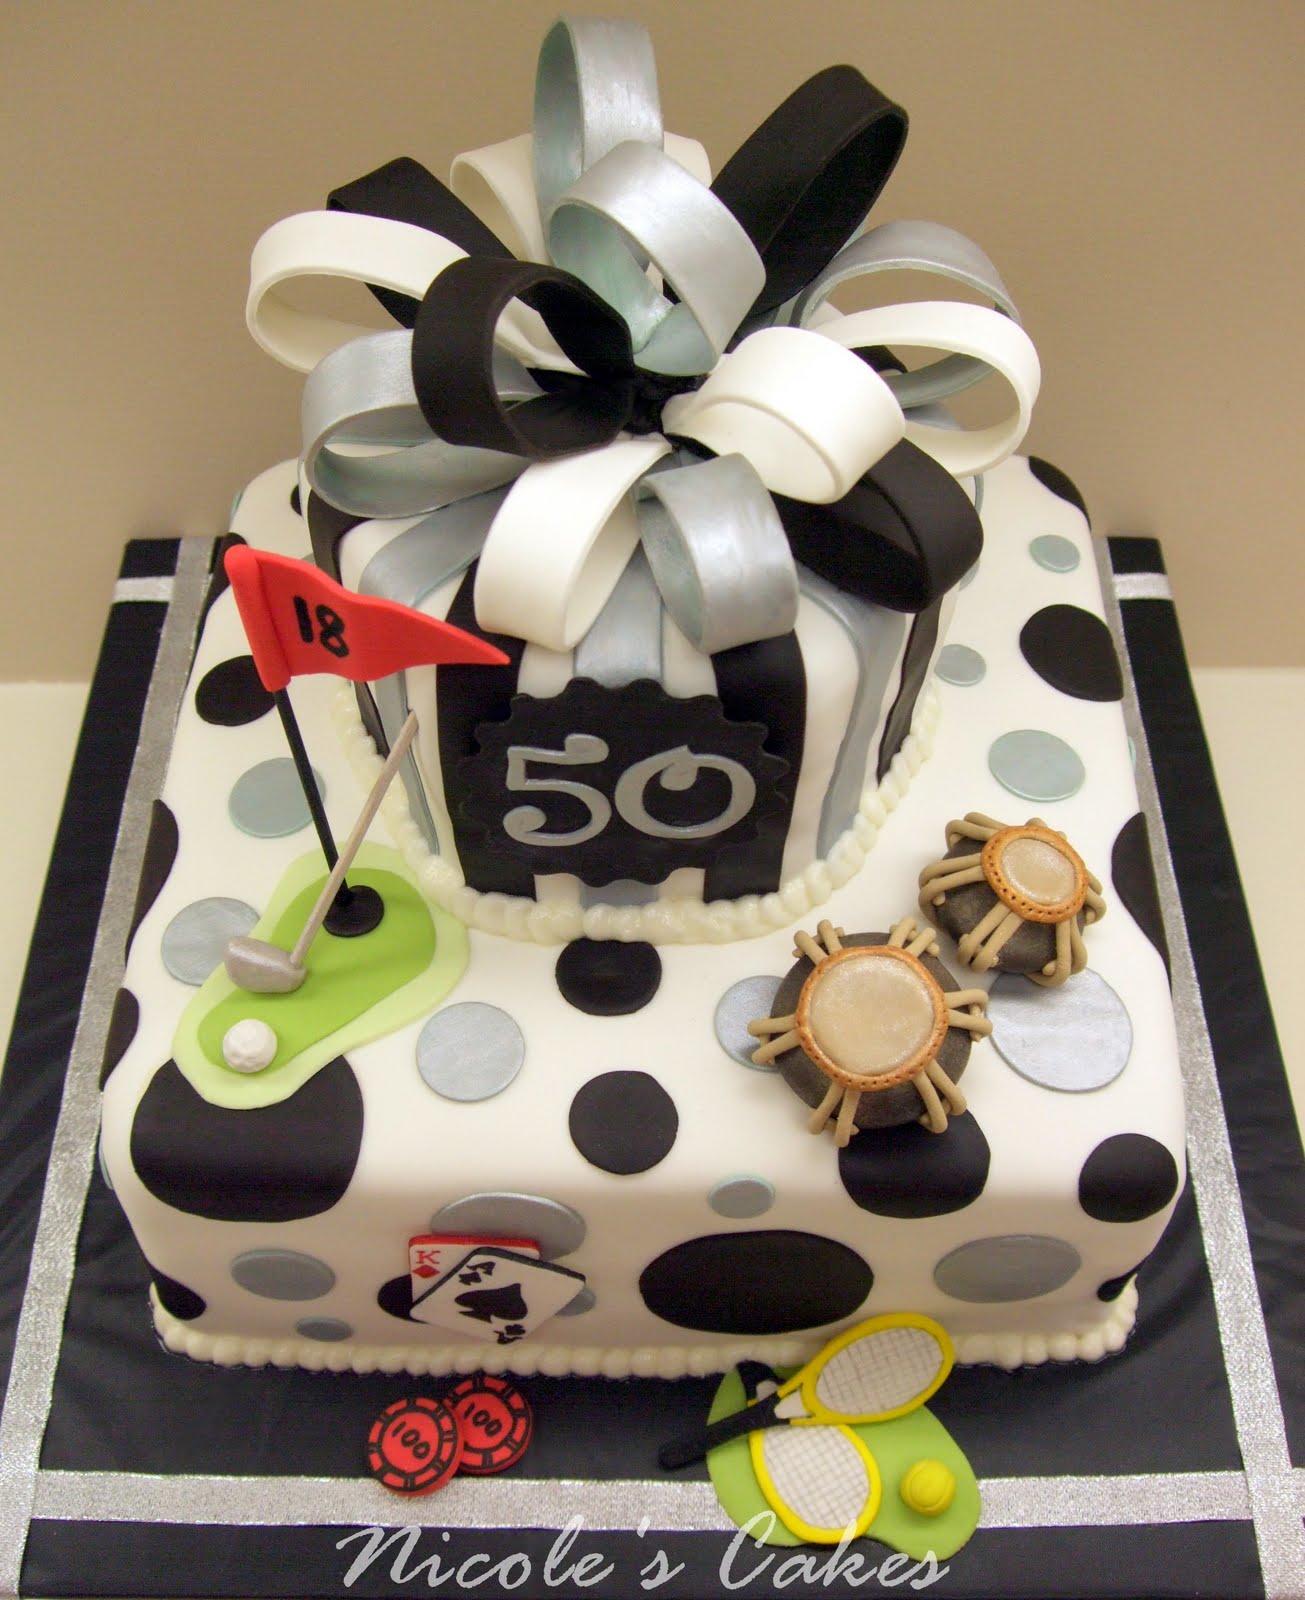 50th Birthday Cake Ideas For Her